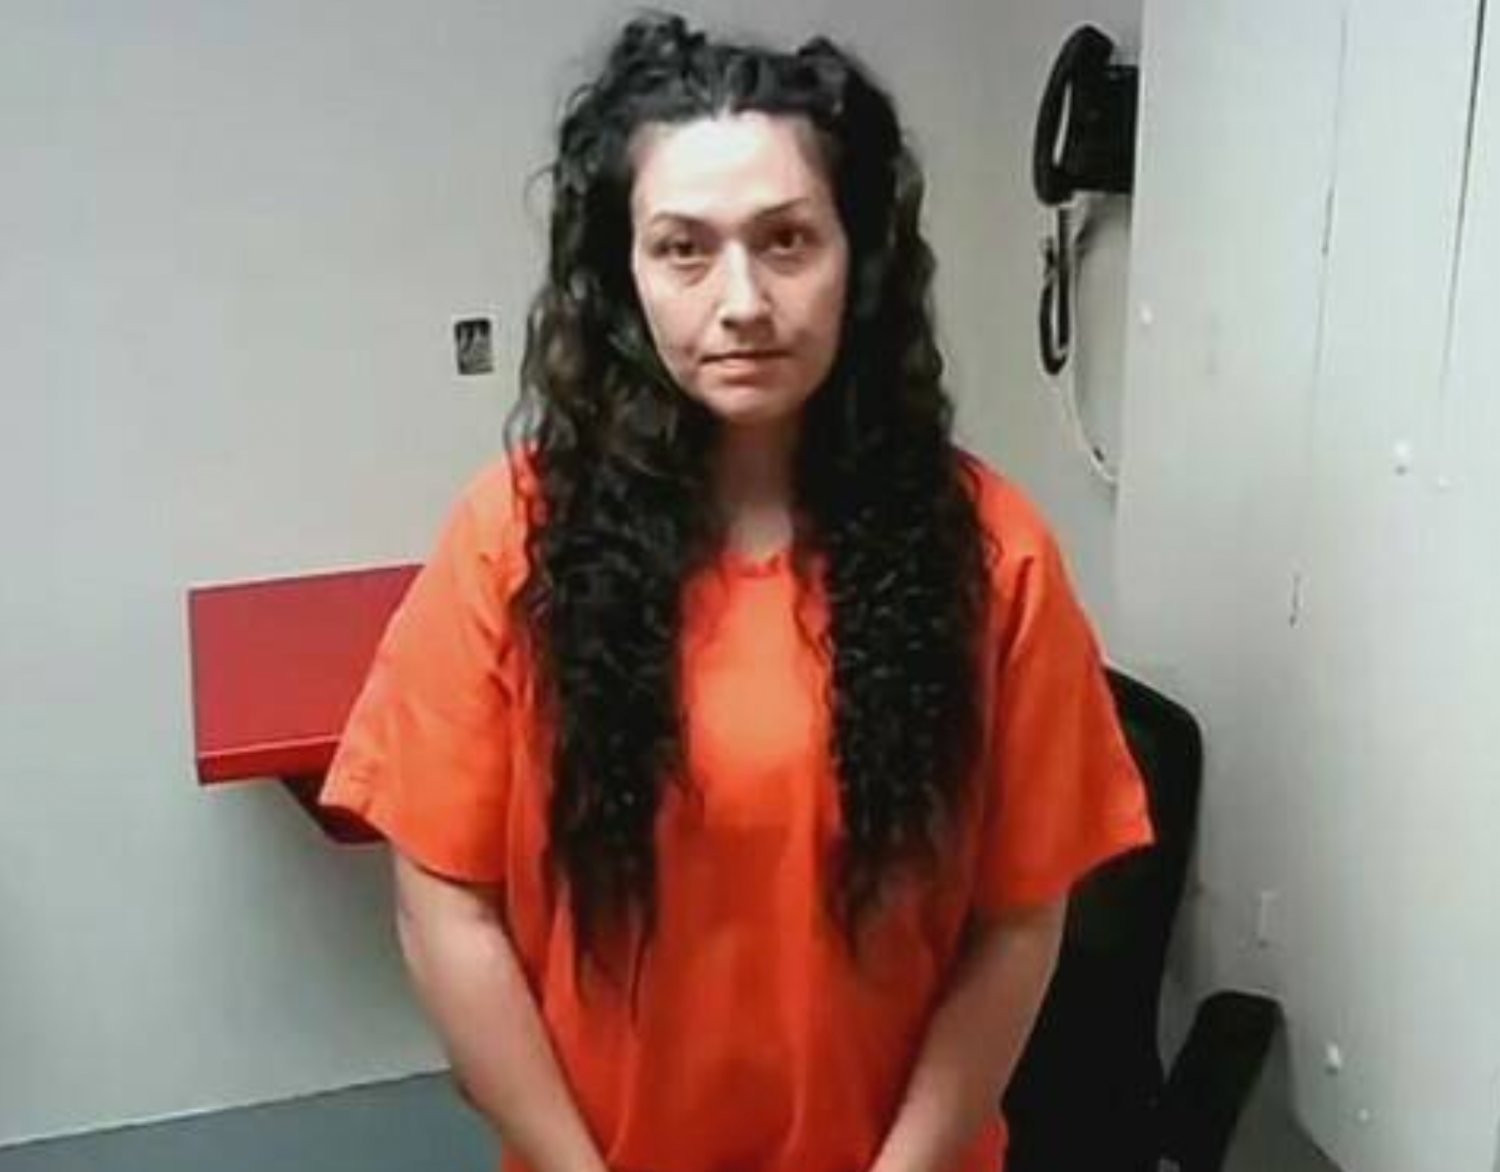 FILE PHOTO — Eight days removed from being arrested and charged with identity theft, Jordan Bowers, clad in orange, appeared before the Grays Harbor Superior Court for her arraignment hearing shortly after 8 a.m. on Monday, Jan. 23, in Montesano.